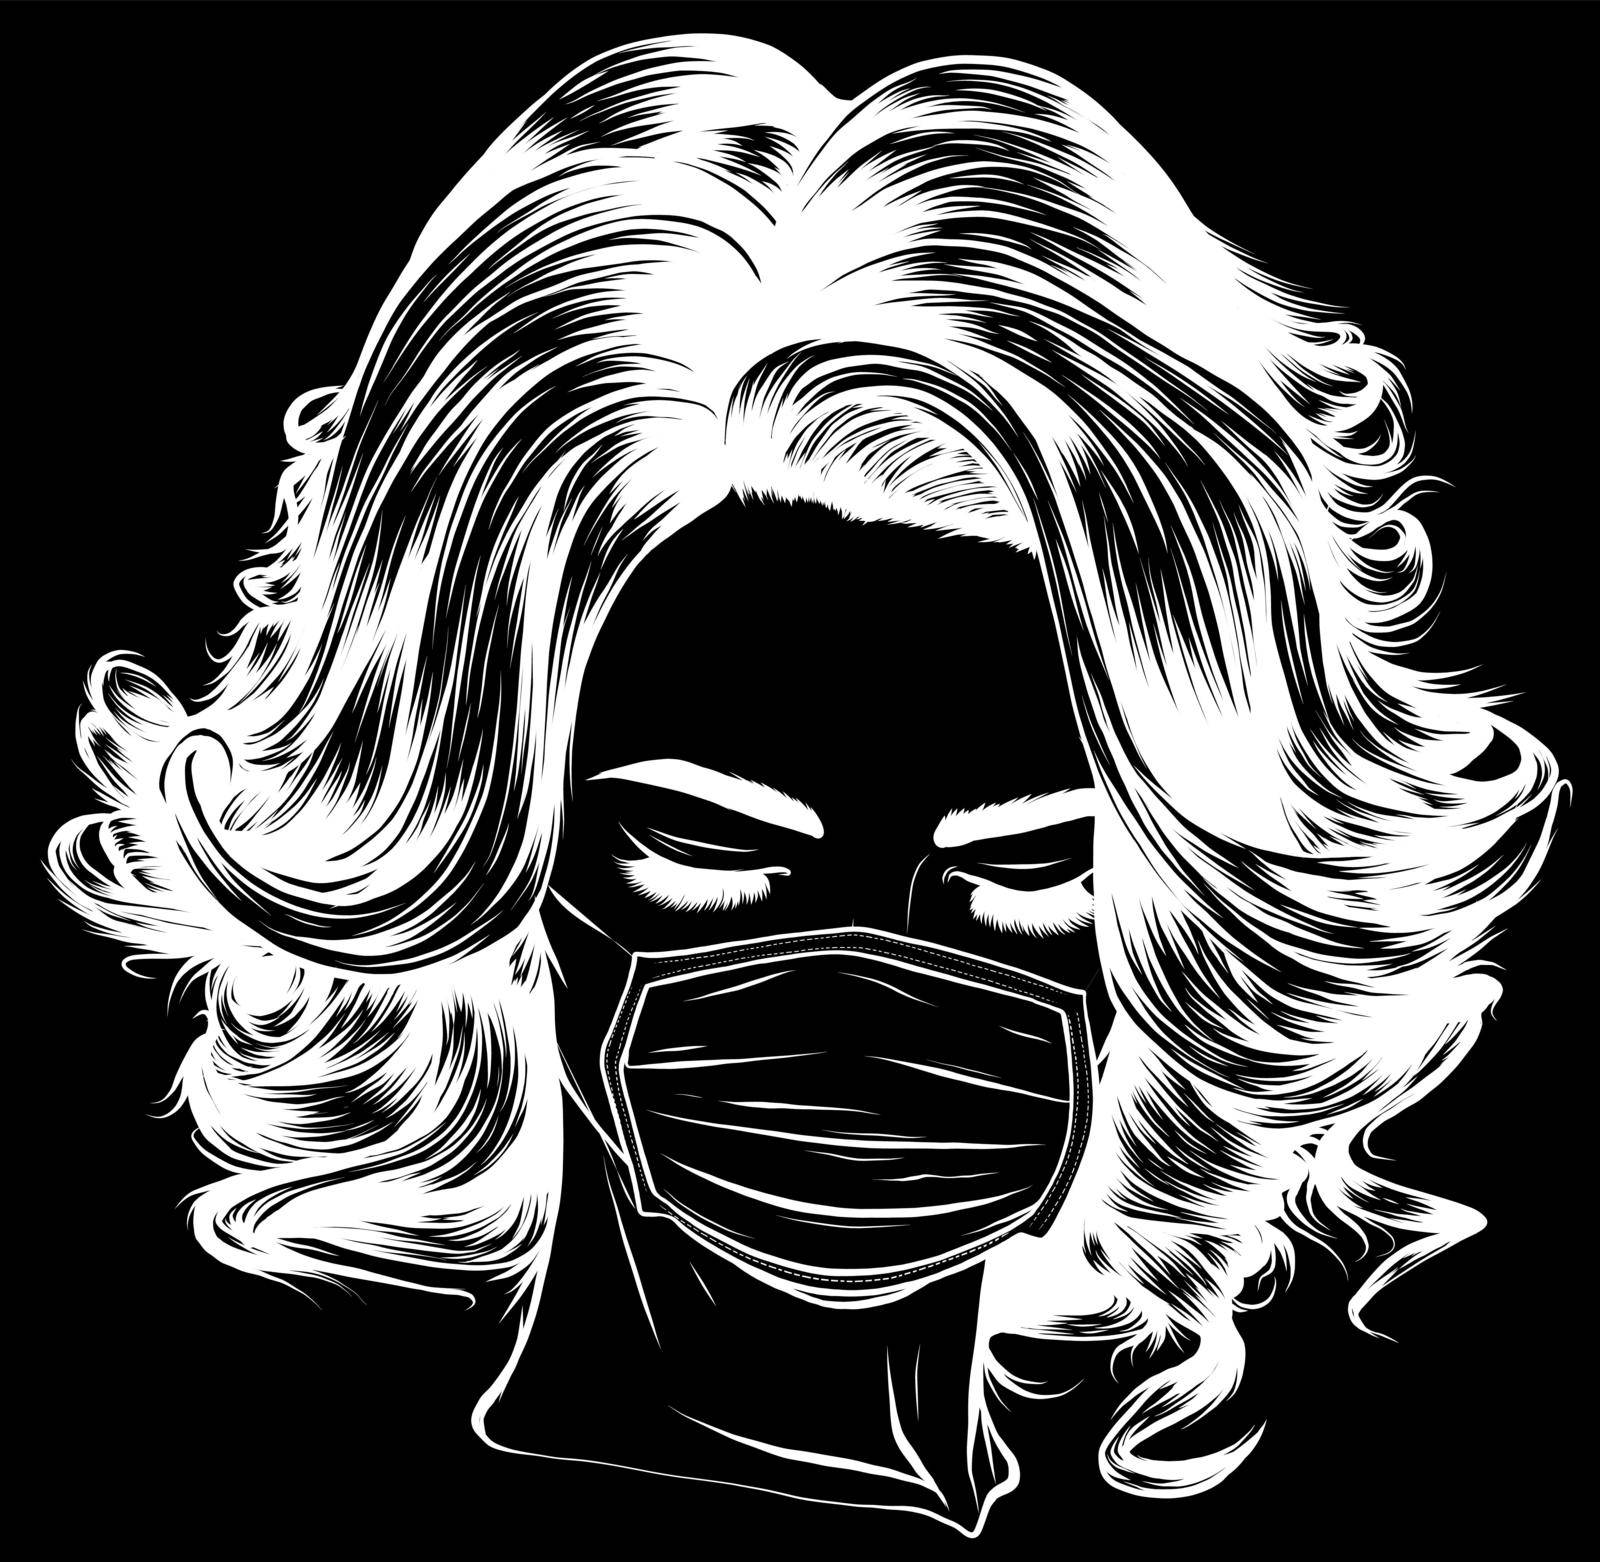 Woman wearing disposable medical surgical face mask. Vector